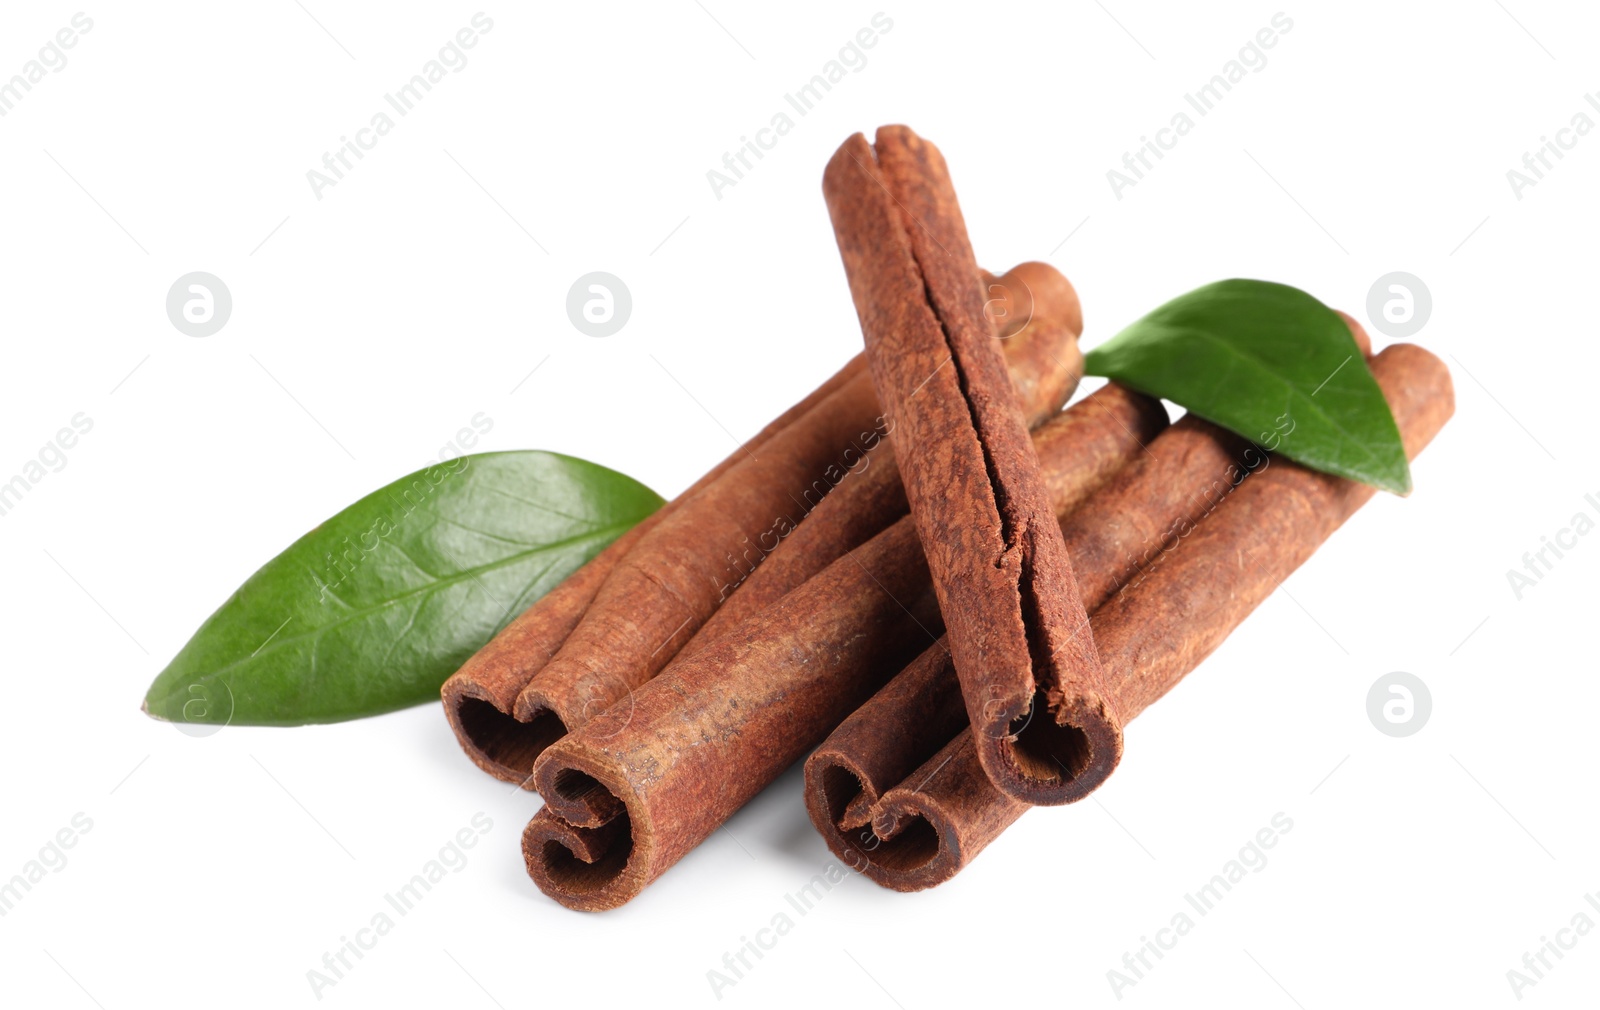 Photo of Cinnamon sticks and green leaves isolated on white